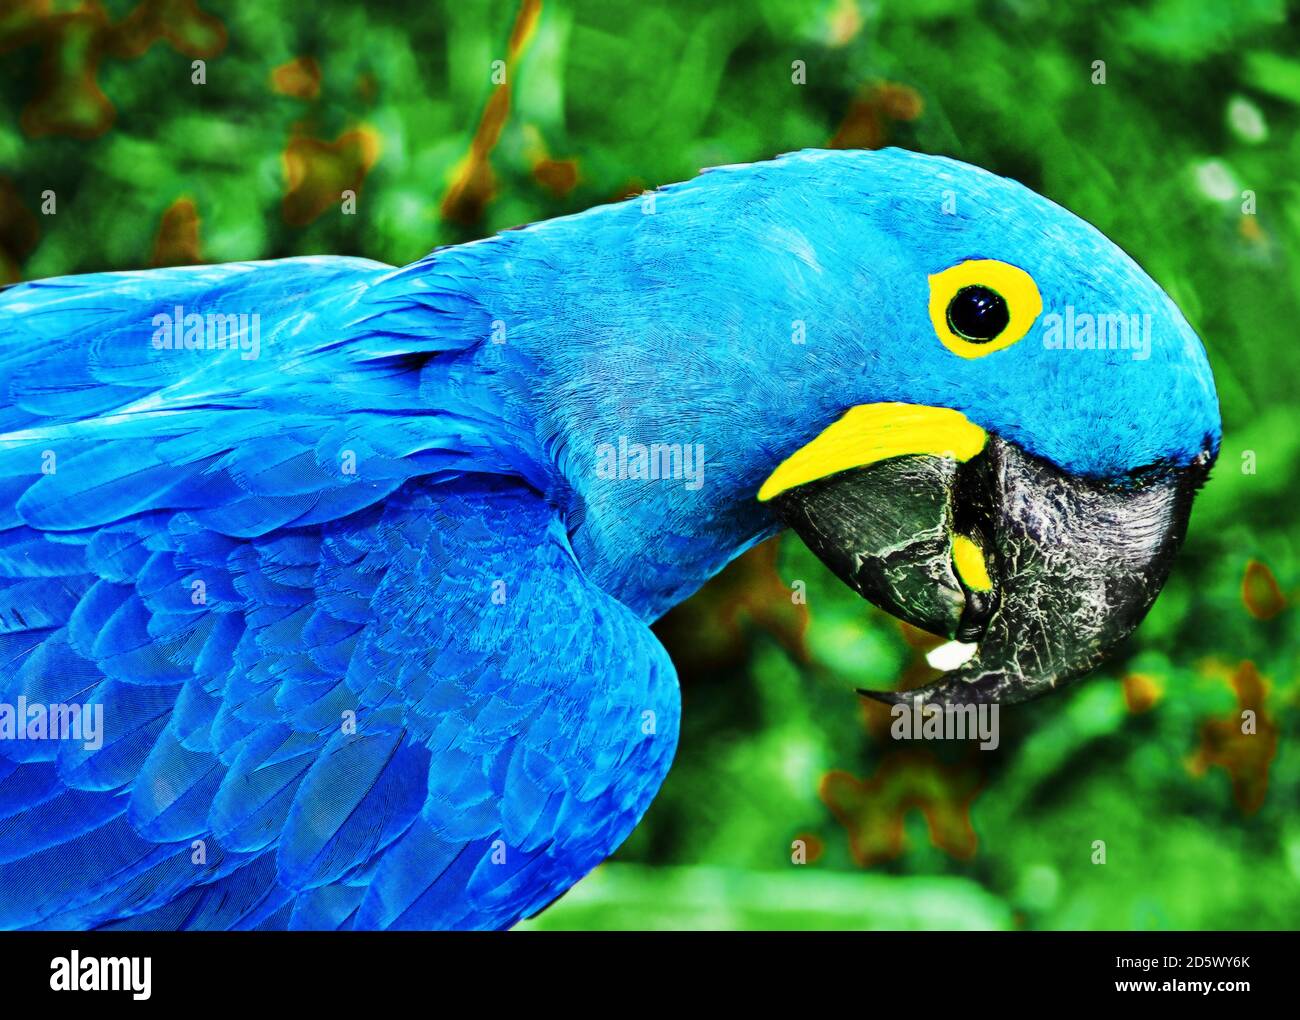 Parrot blue Spix's macaw close up sitting on the tree Stock Photo